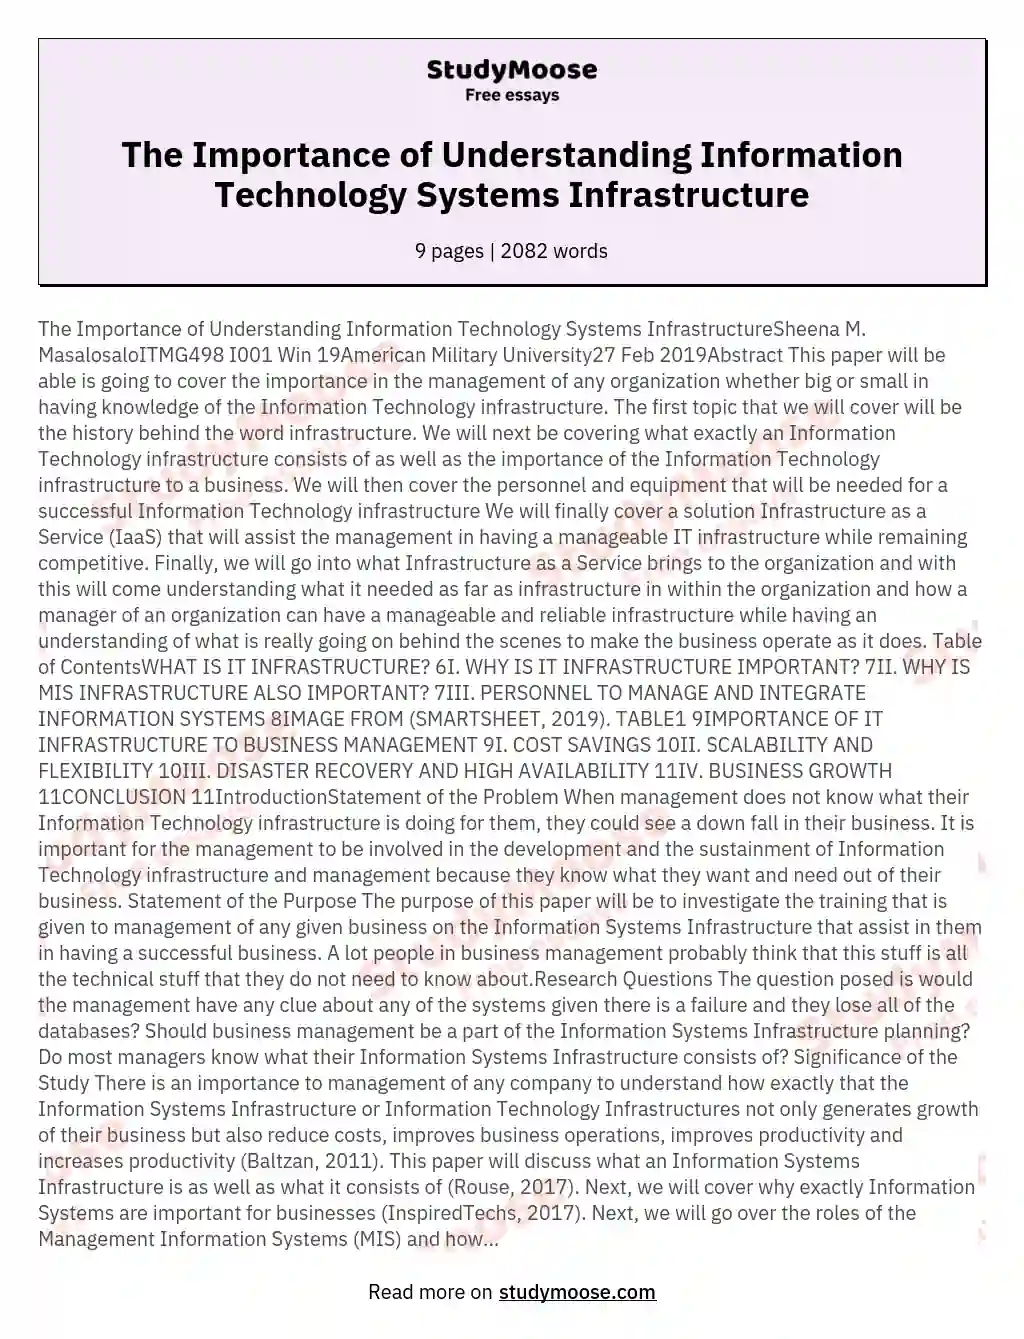 essay about importance of information technology